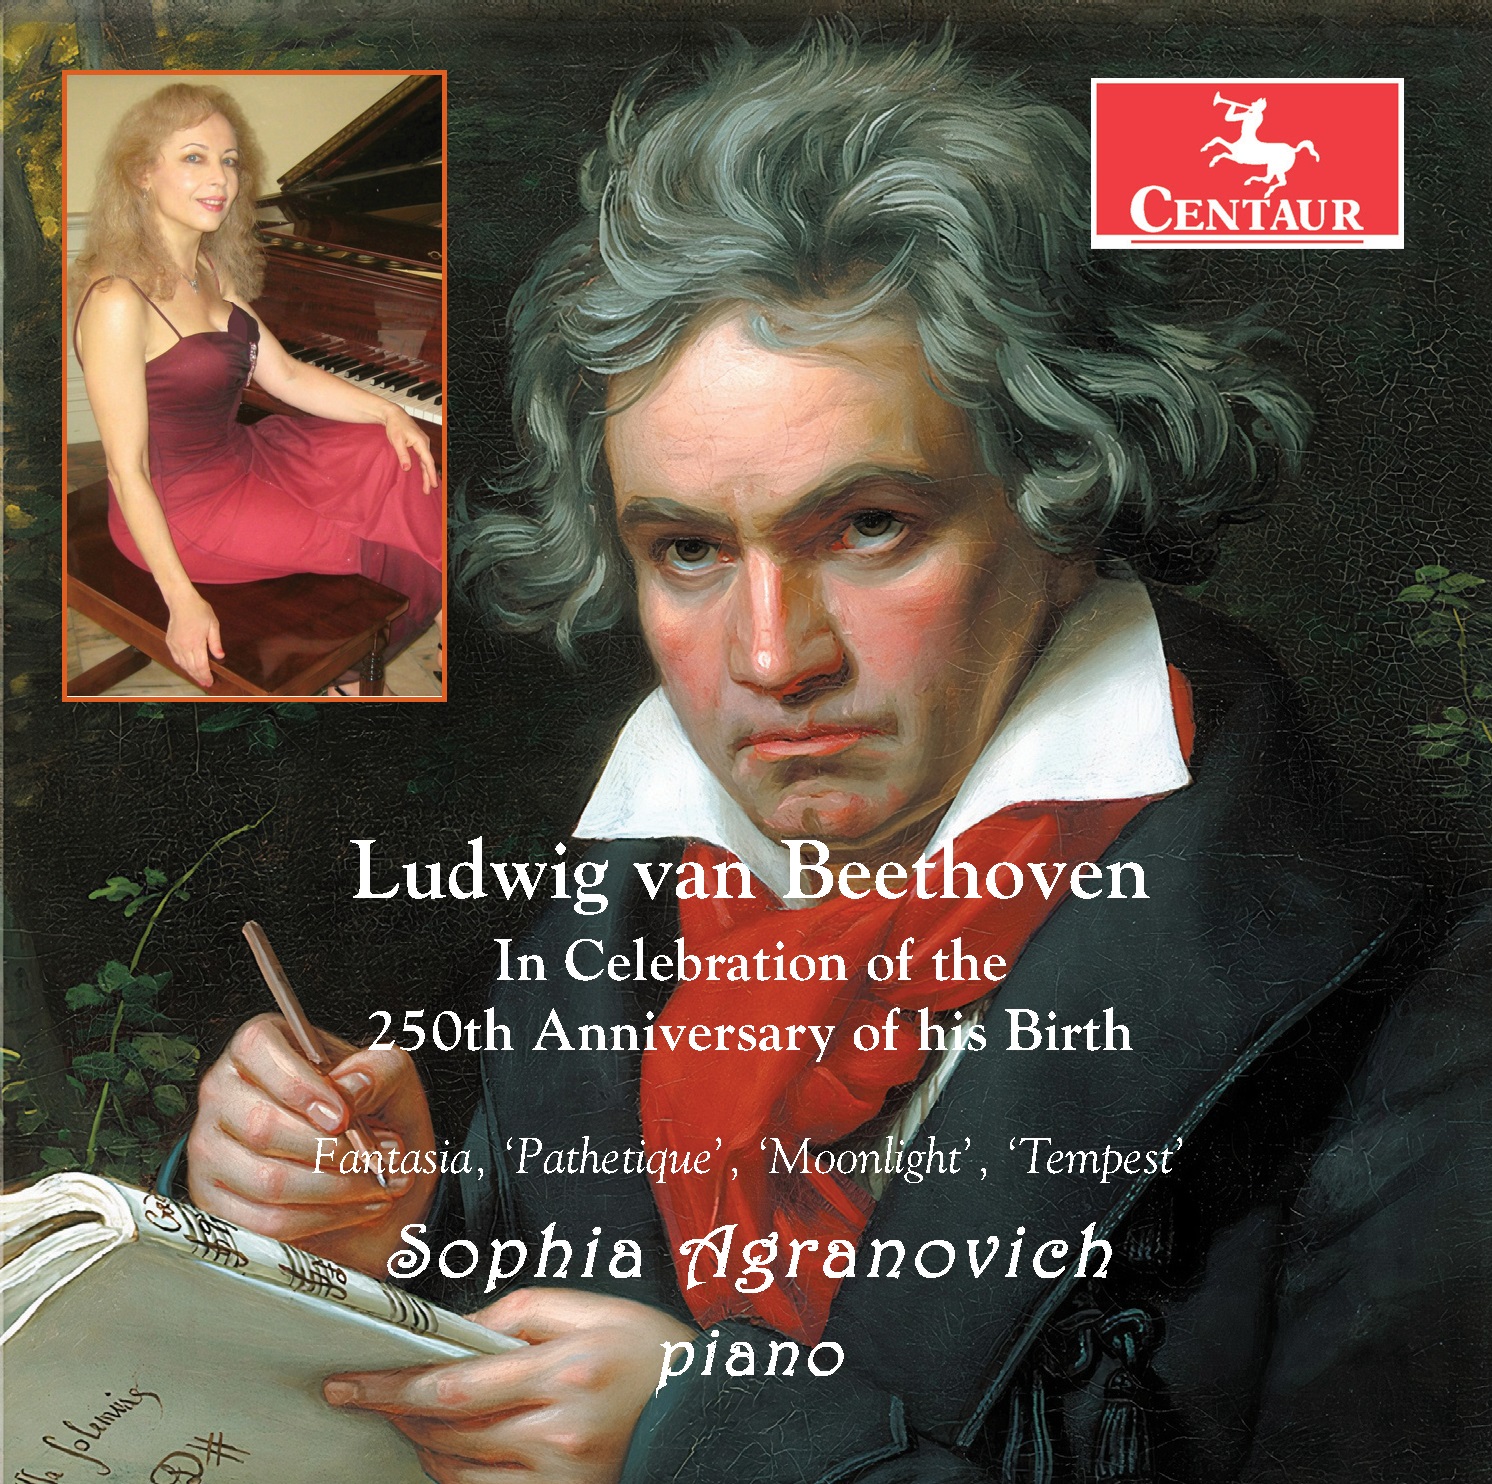 CD Album 'Ludwig van Beethoven: In Celebration of the 250th Anniversary'